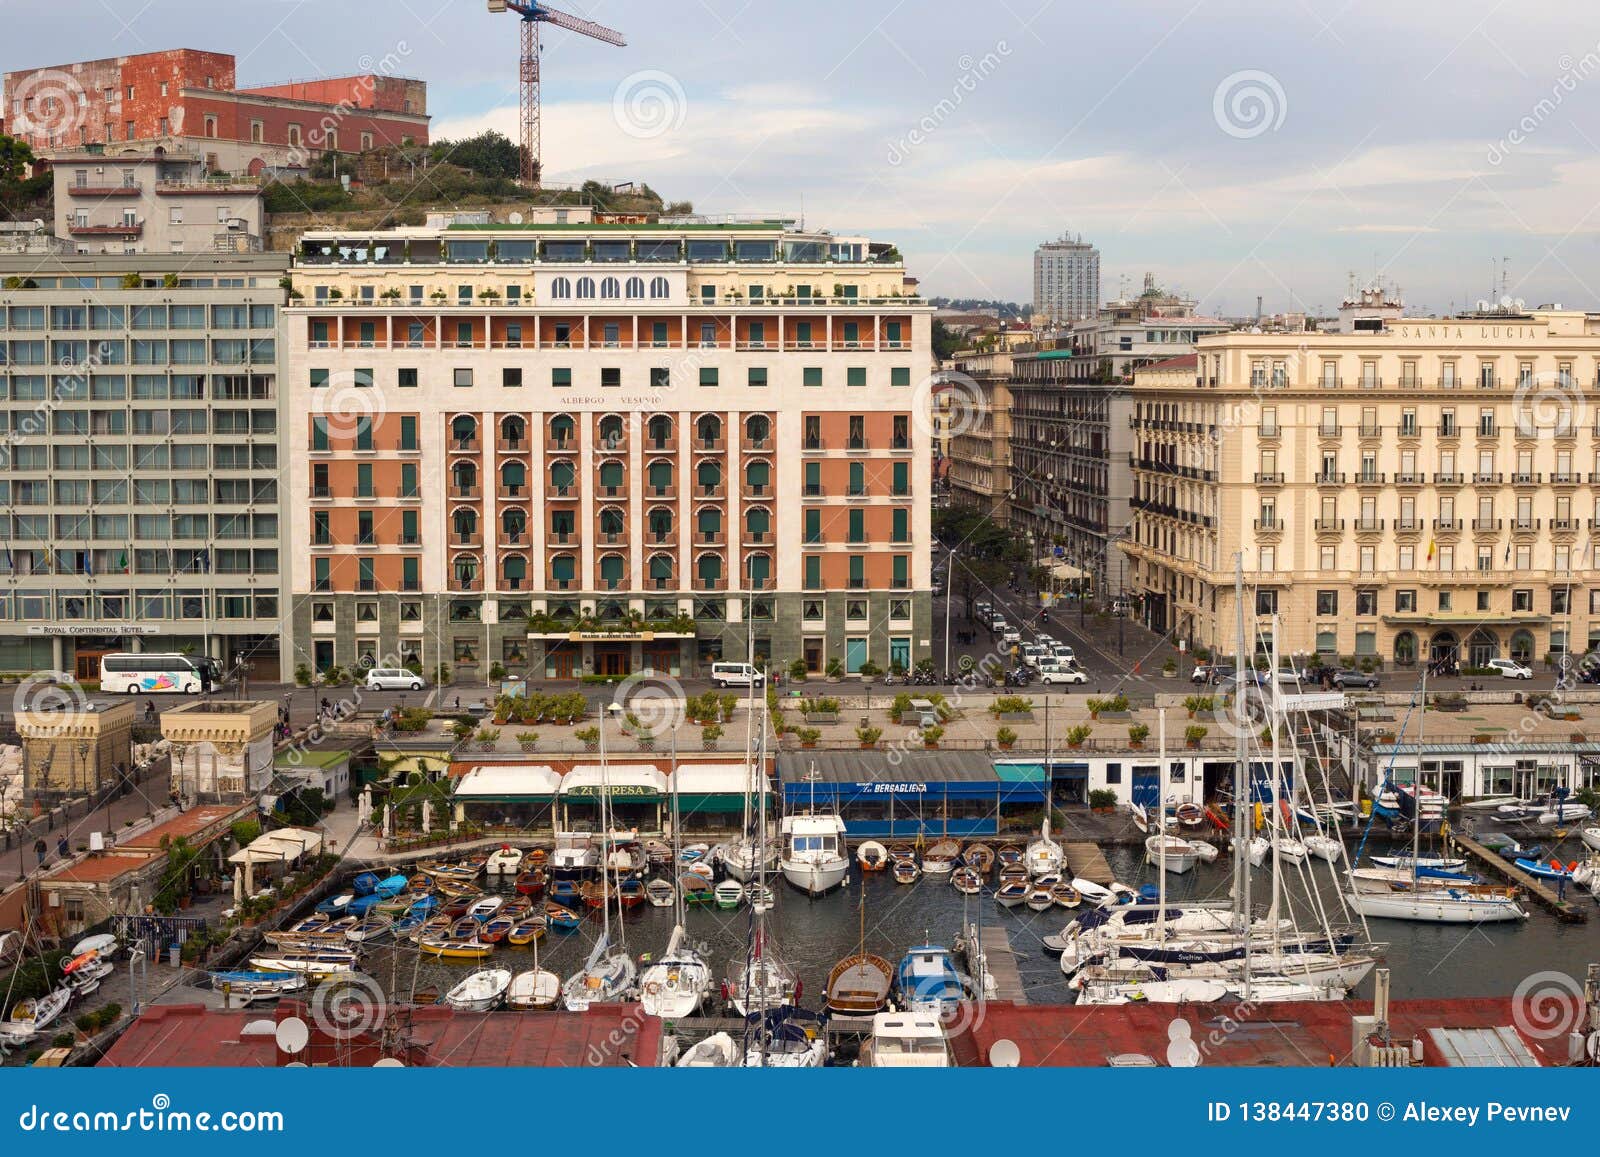 Naples Italy October 31 2015 Air View Of The Albergo Vesuvio Hotel And Grand Hotel Santa Lucia In Historical Center Of Naples Editorial Image Image Of Cityscape Santa 138447380